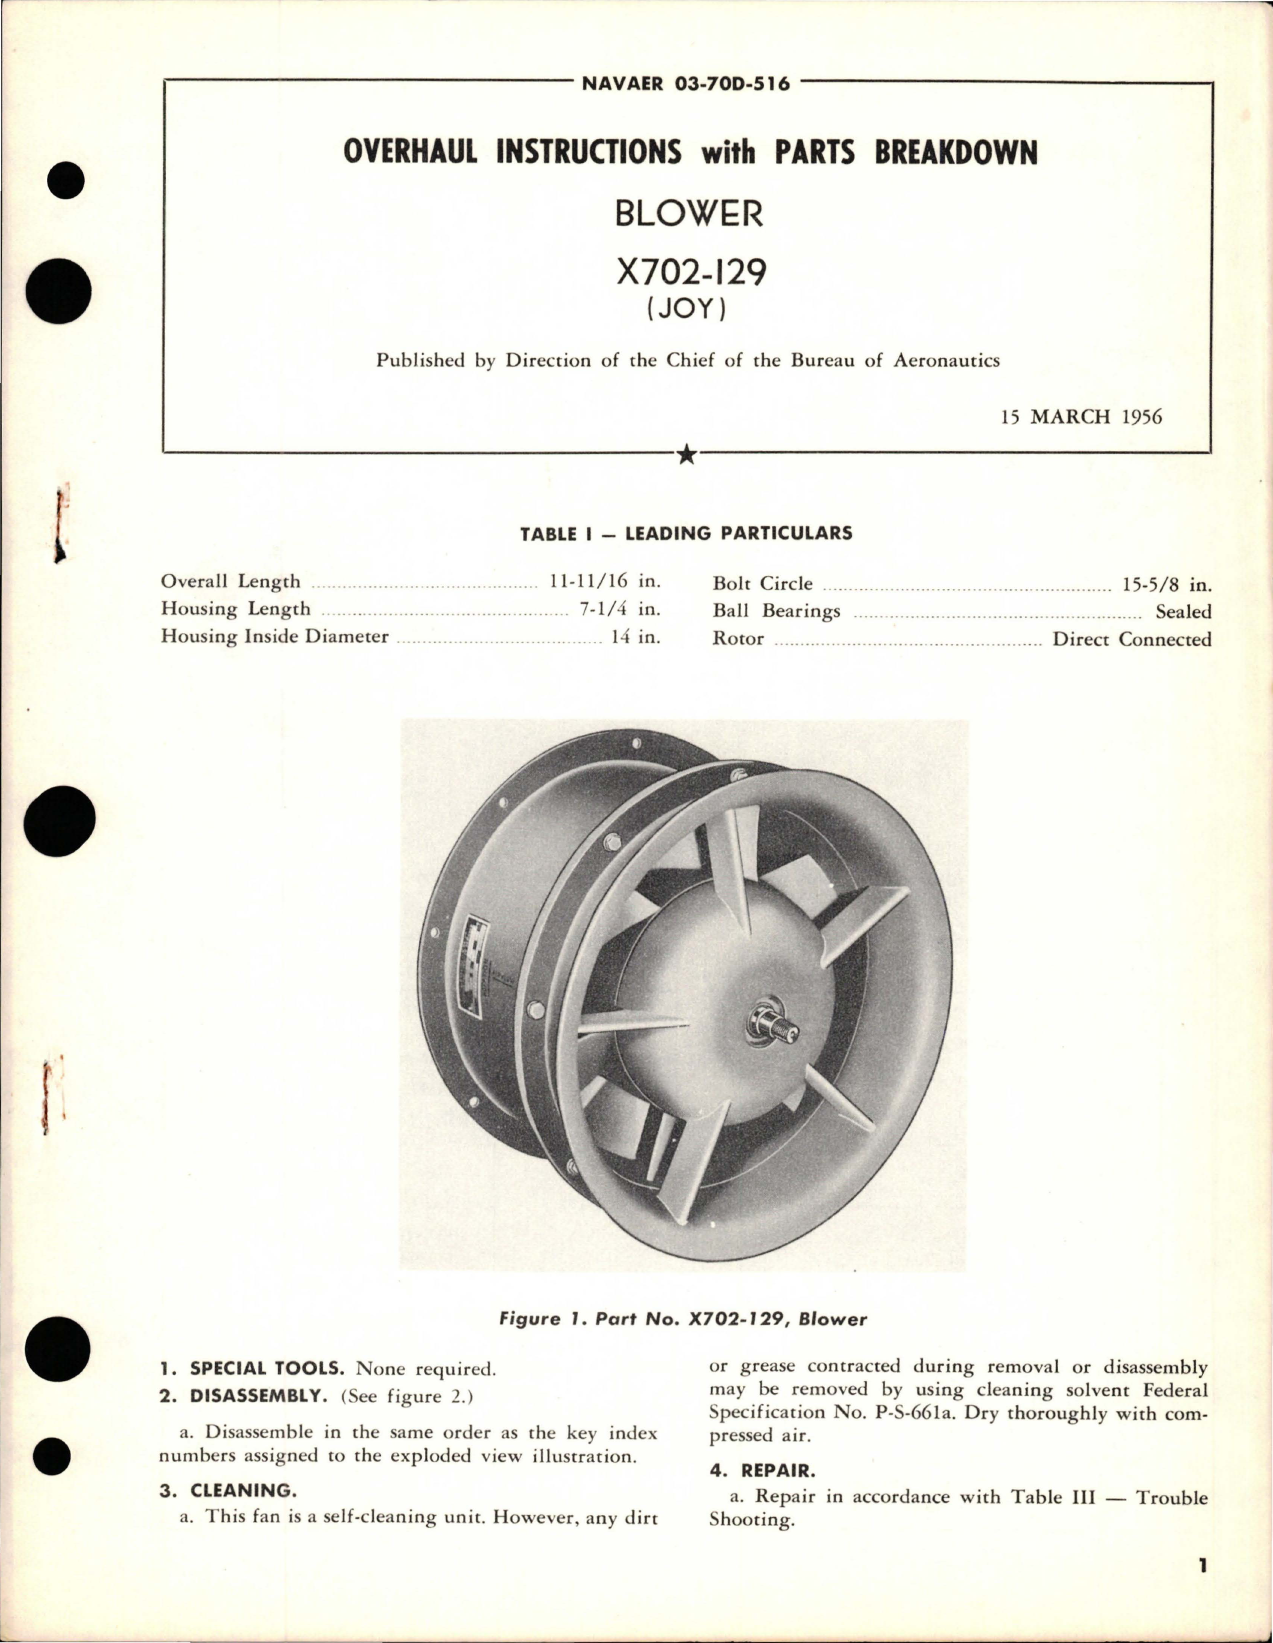 Sample page 1 from AirCorps Library document: Overhaul Instructions with Parts Breakdown for Blower - X702-129 